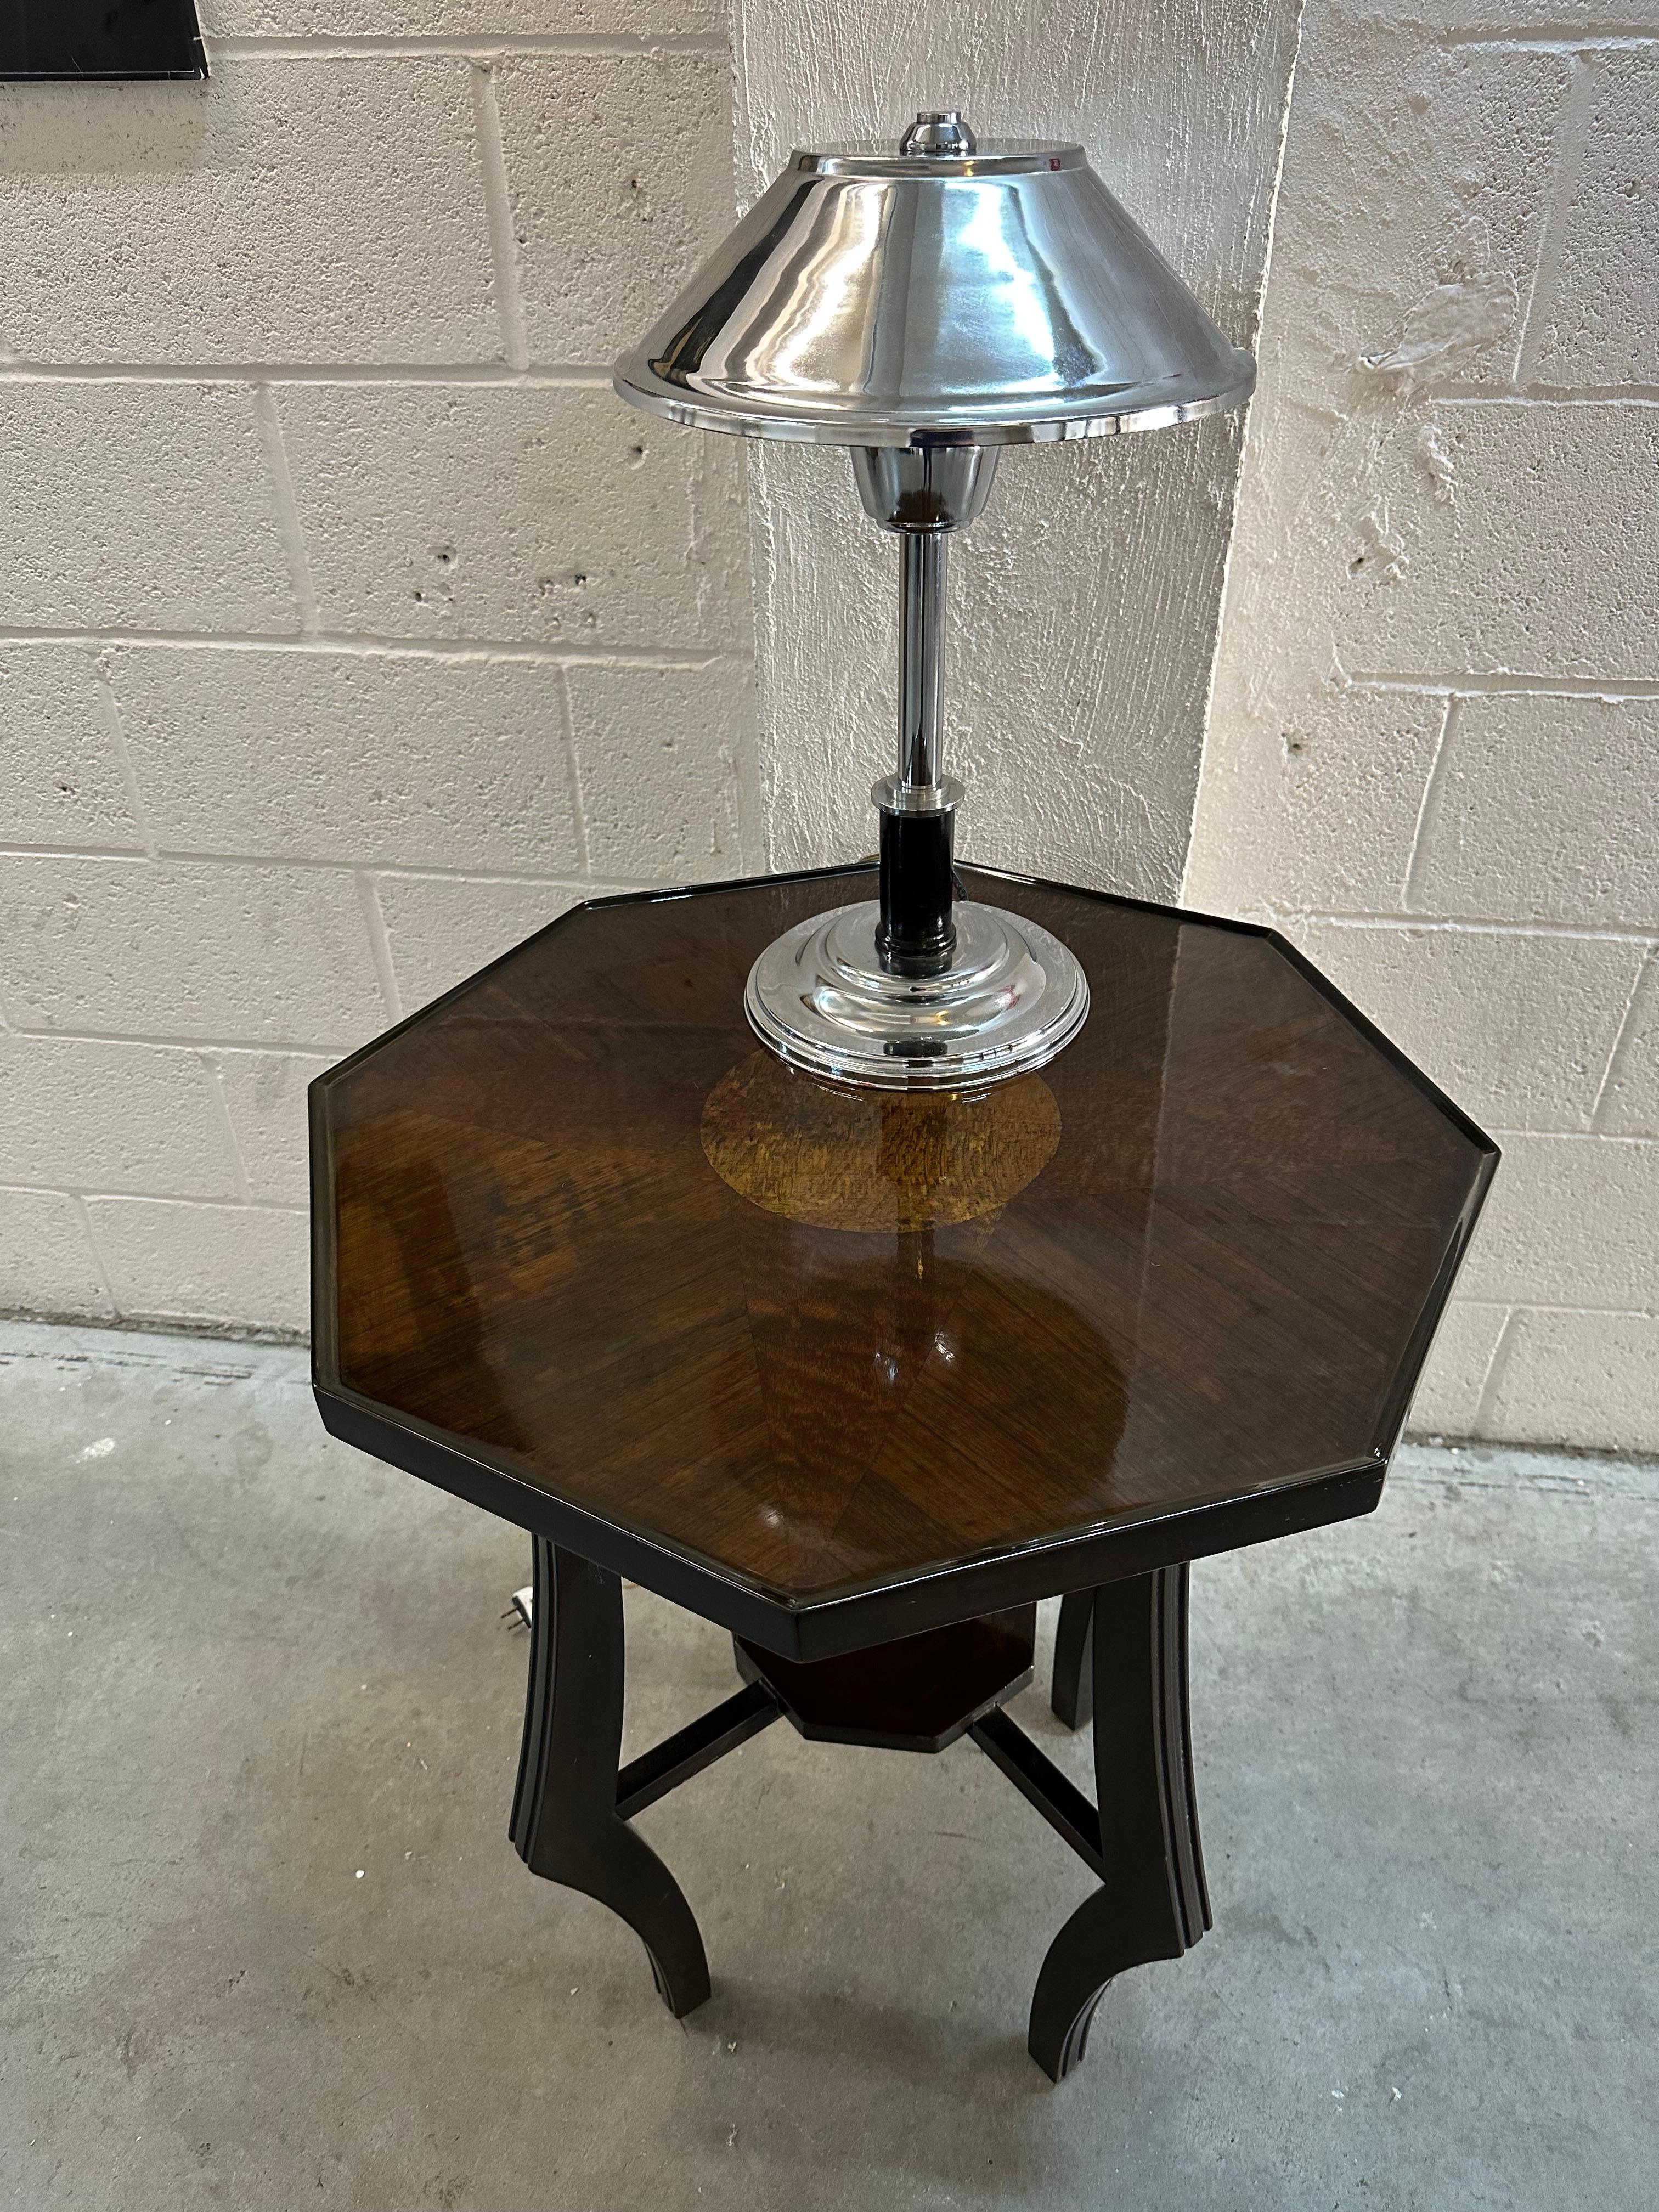 Pair of Art Deco Table Lamp in wood and chrome, 1930 For Sale 4